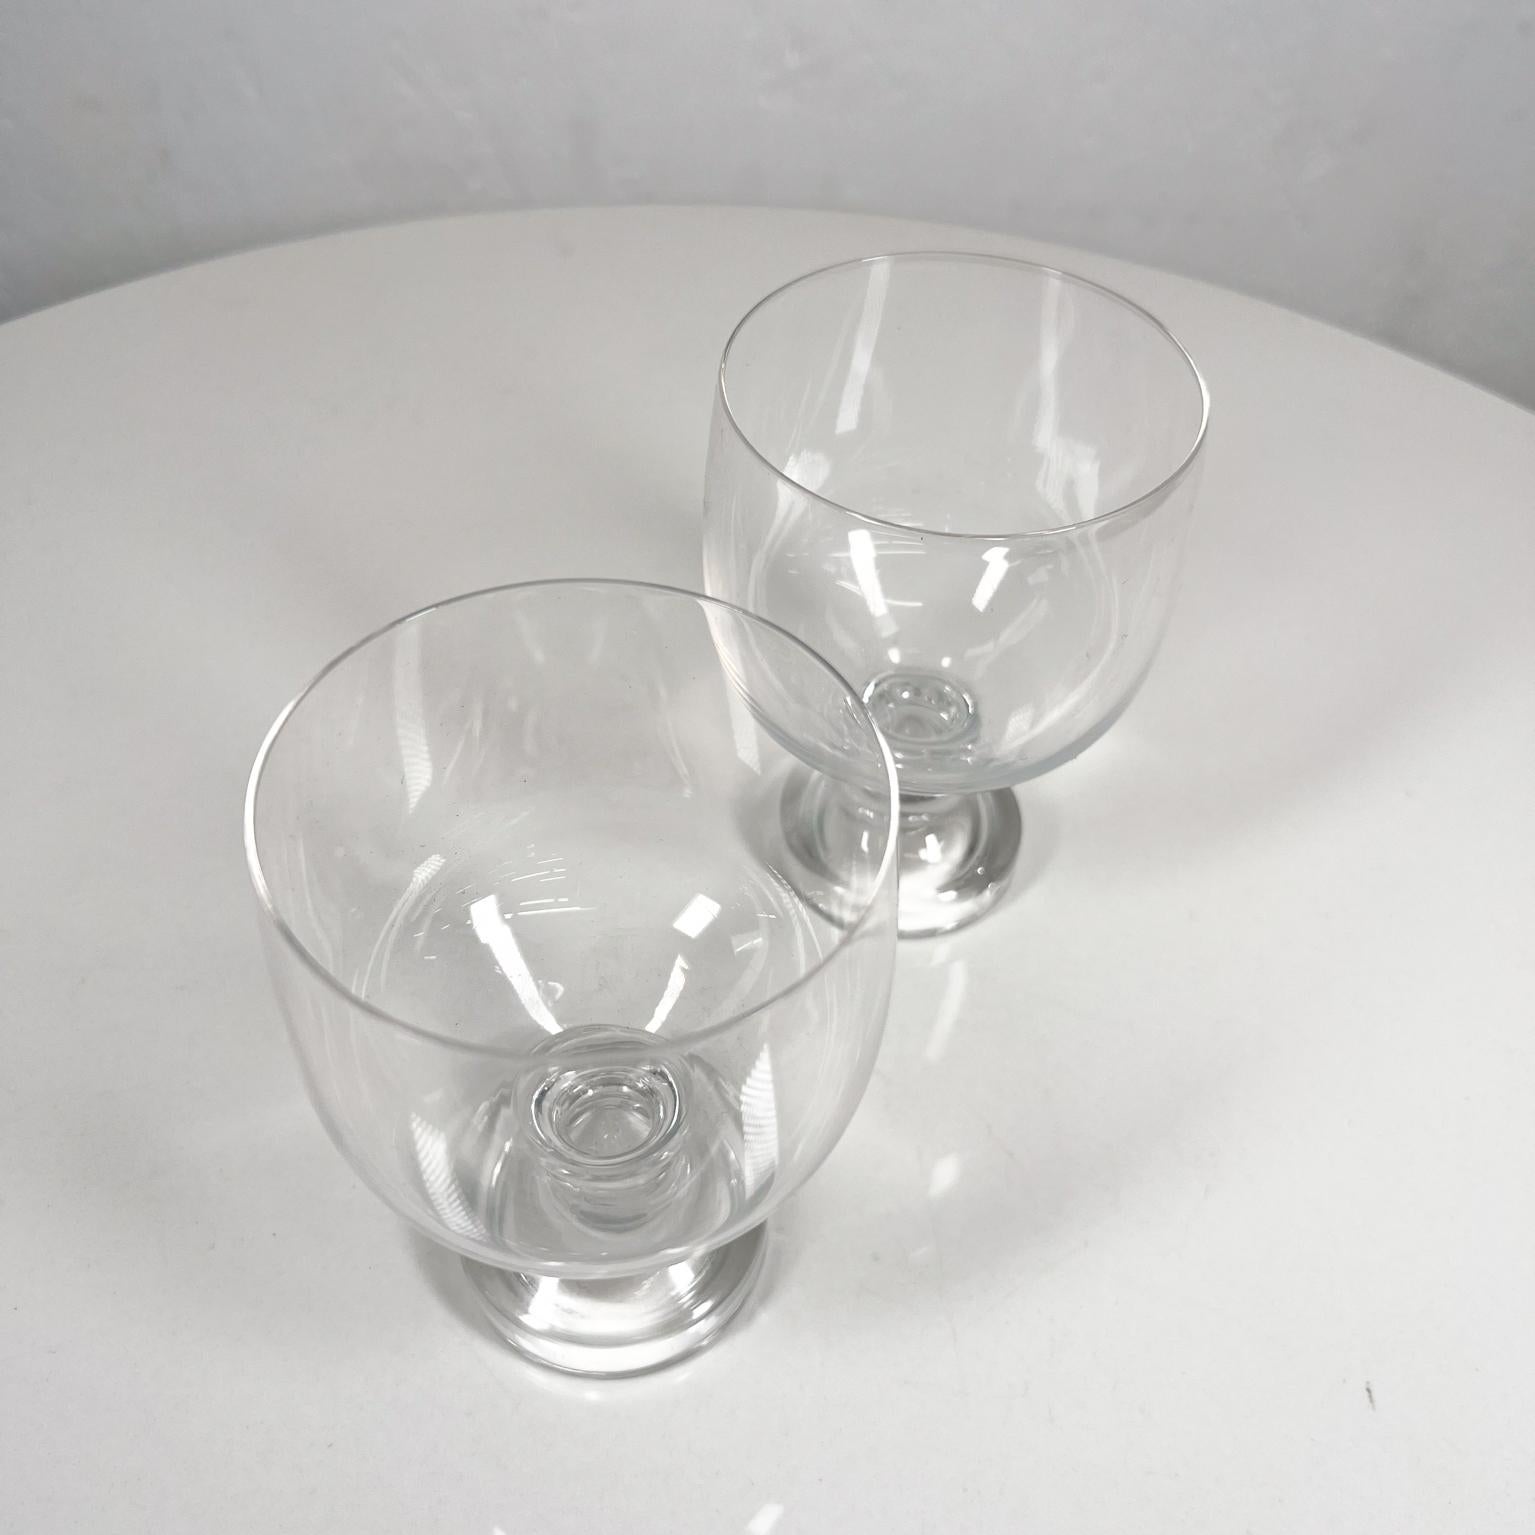 1970s Vintage Stemware Crystal Glasses Set of Two In Good Condition For Sale In Chula Vista, CA